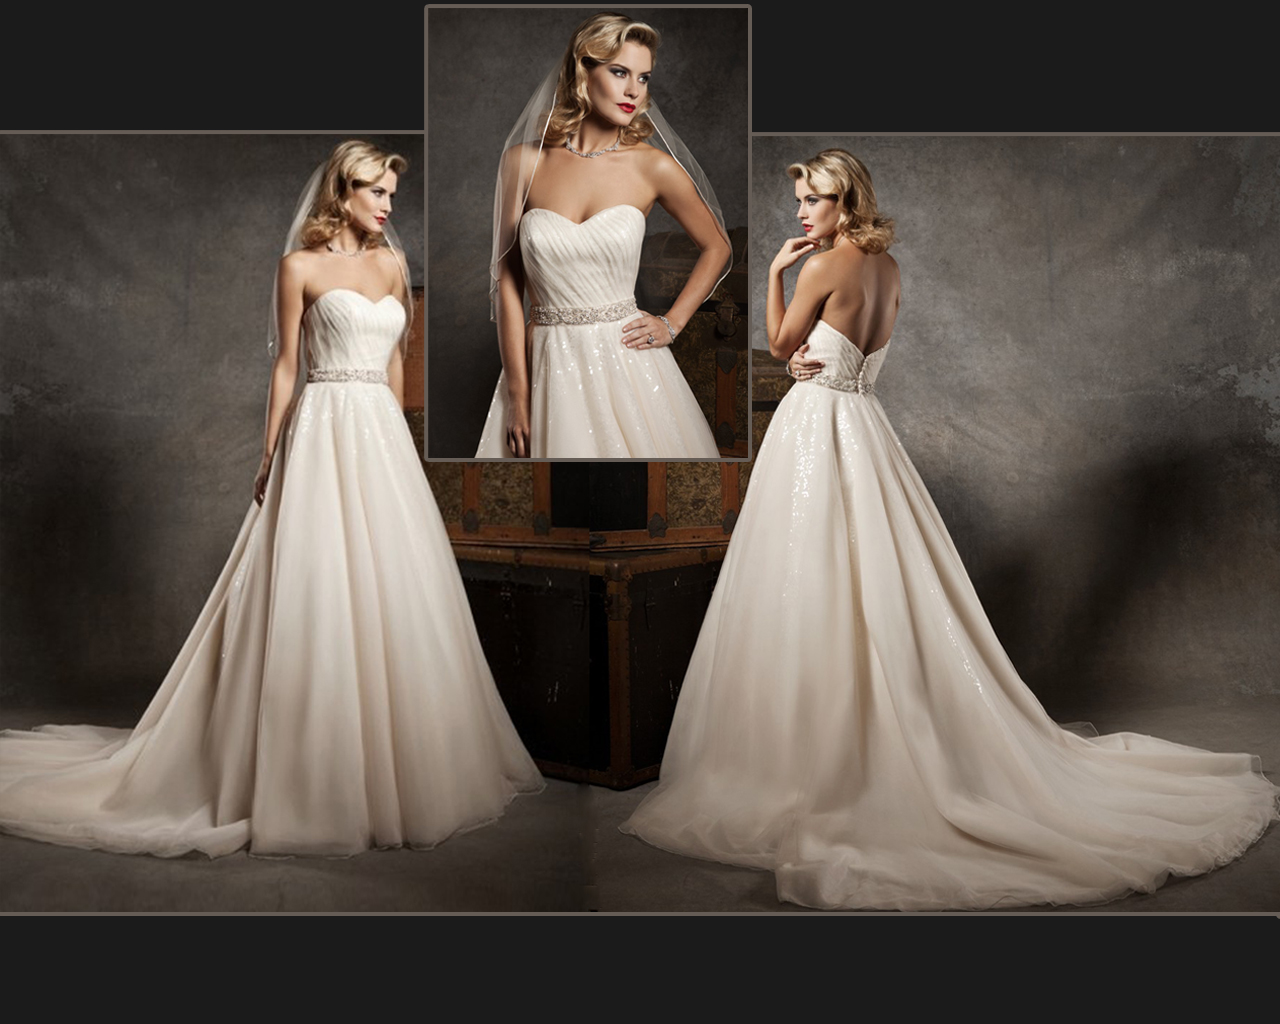 lace wedding dress with belt  Boutique - Be inspired with this wedding dress by Justin Alexander